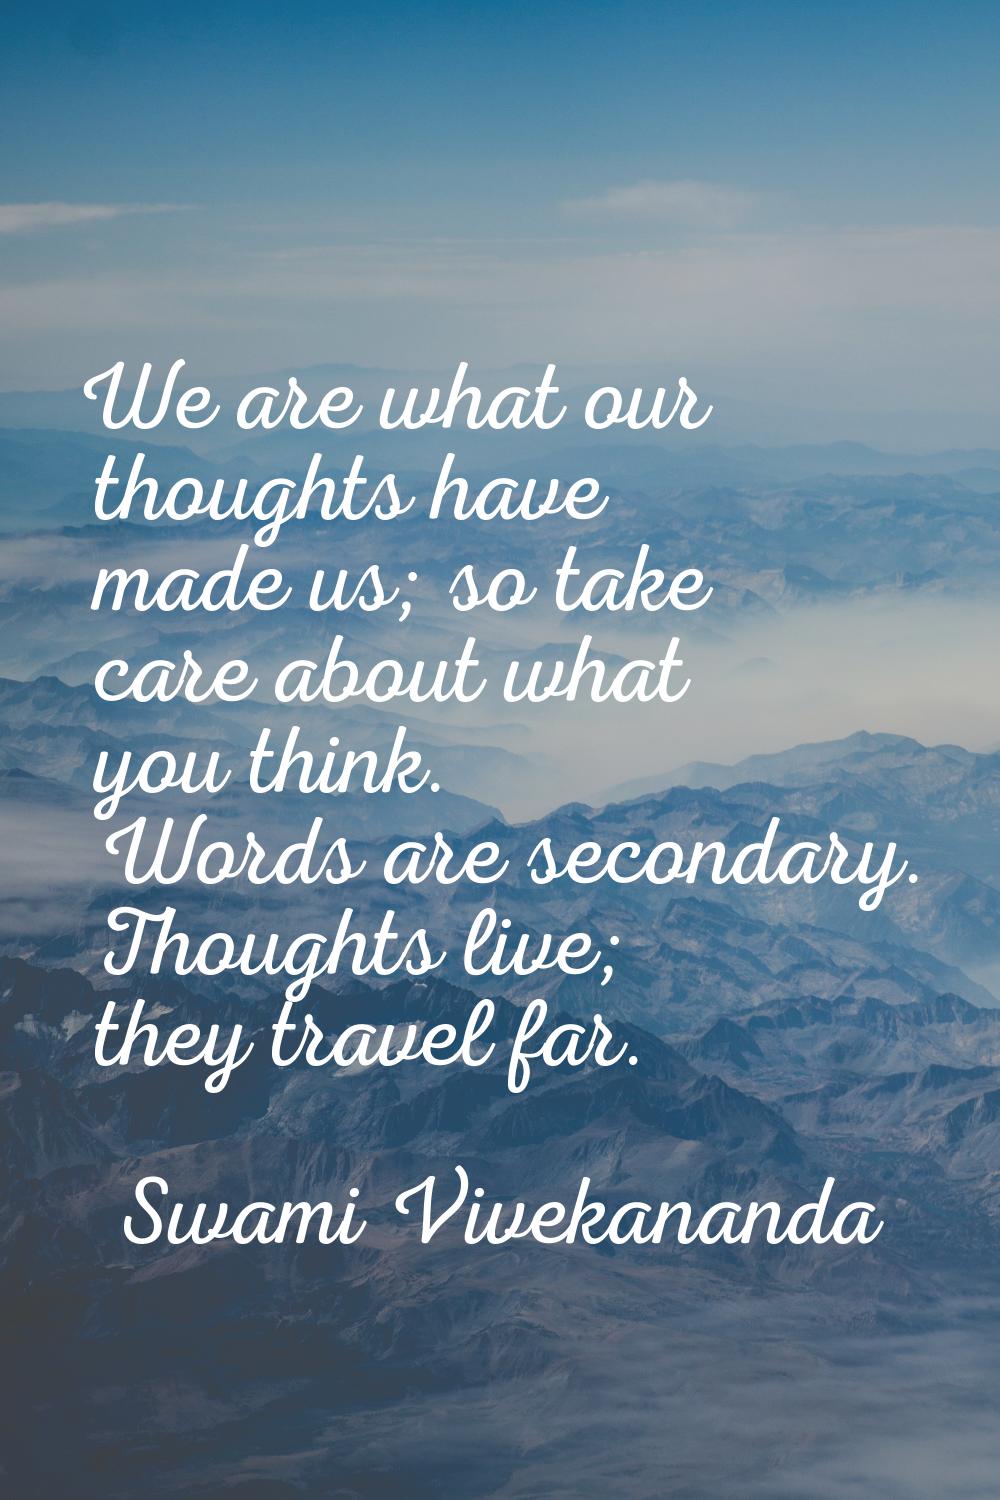 We are what our thoughts have made us; so take care about what you think. Words are secondary. Thou